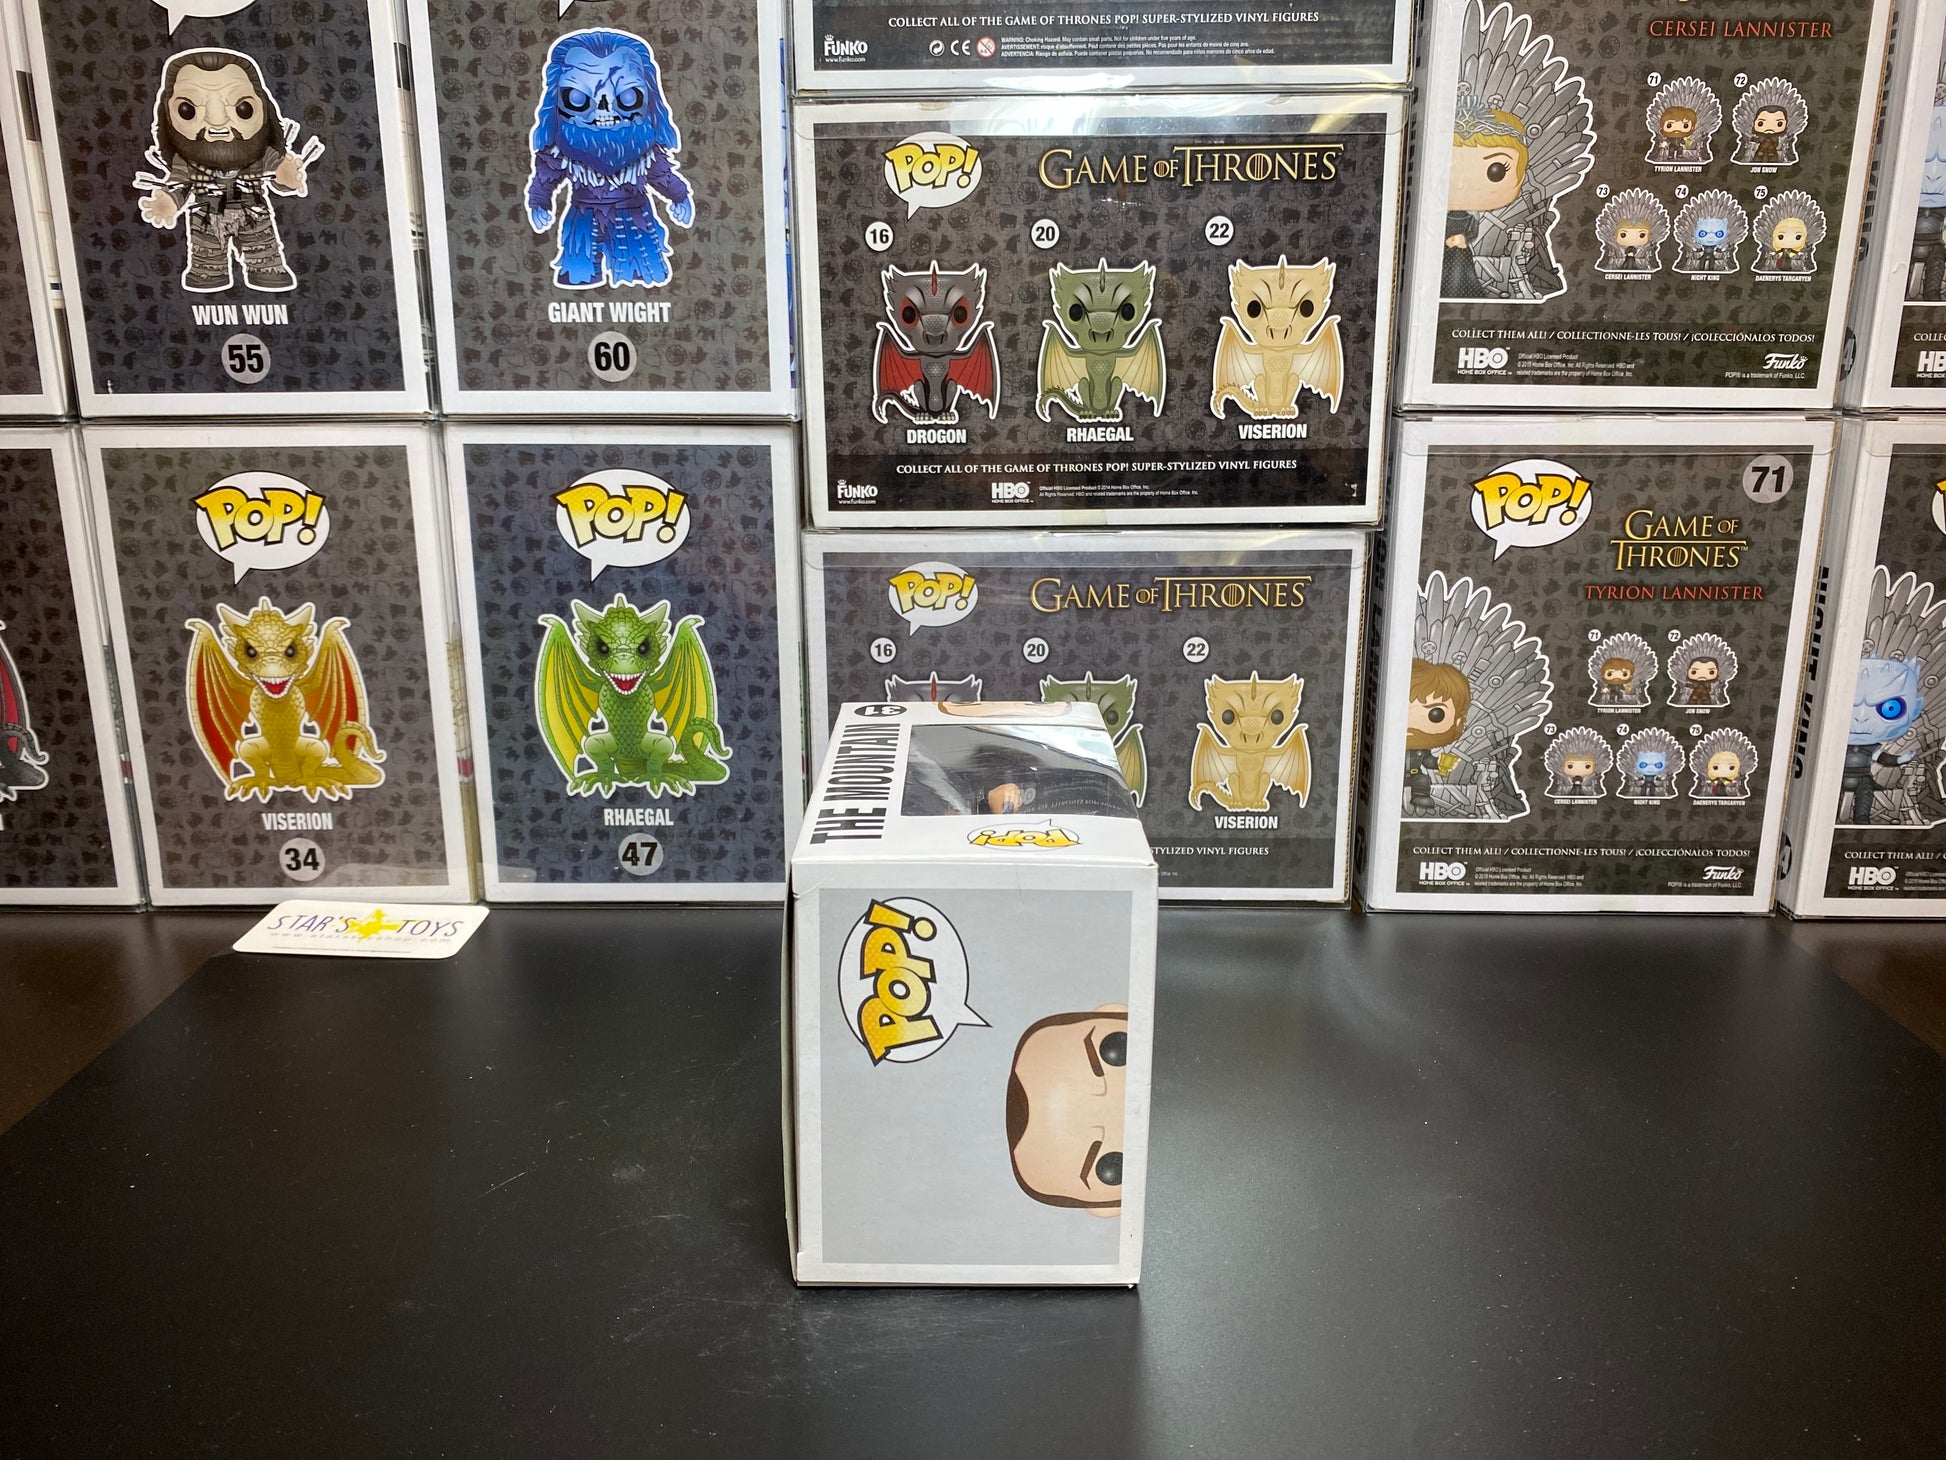 Pop! Game of Thrones -The Mountain - Star's Toy Shop